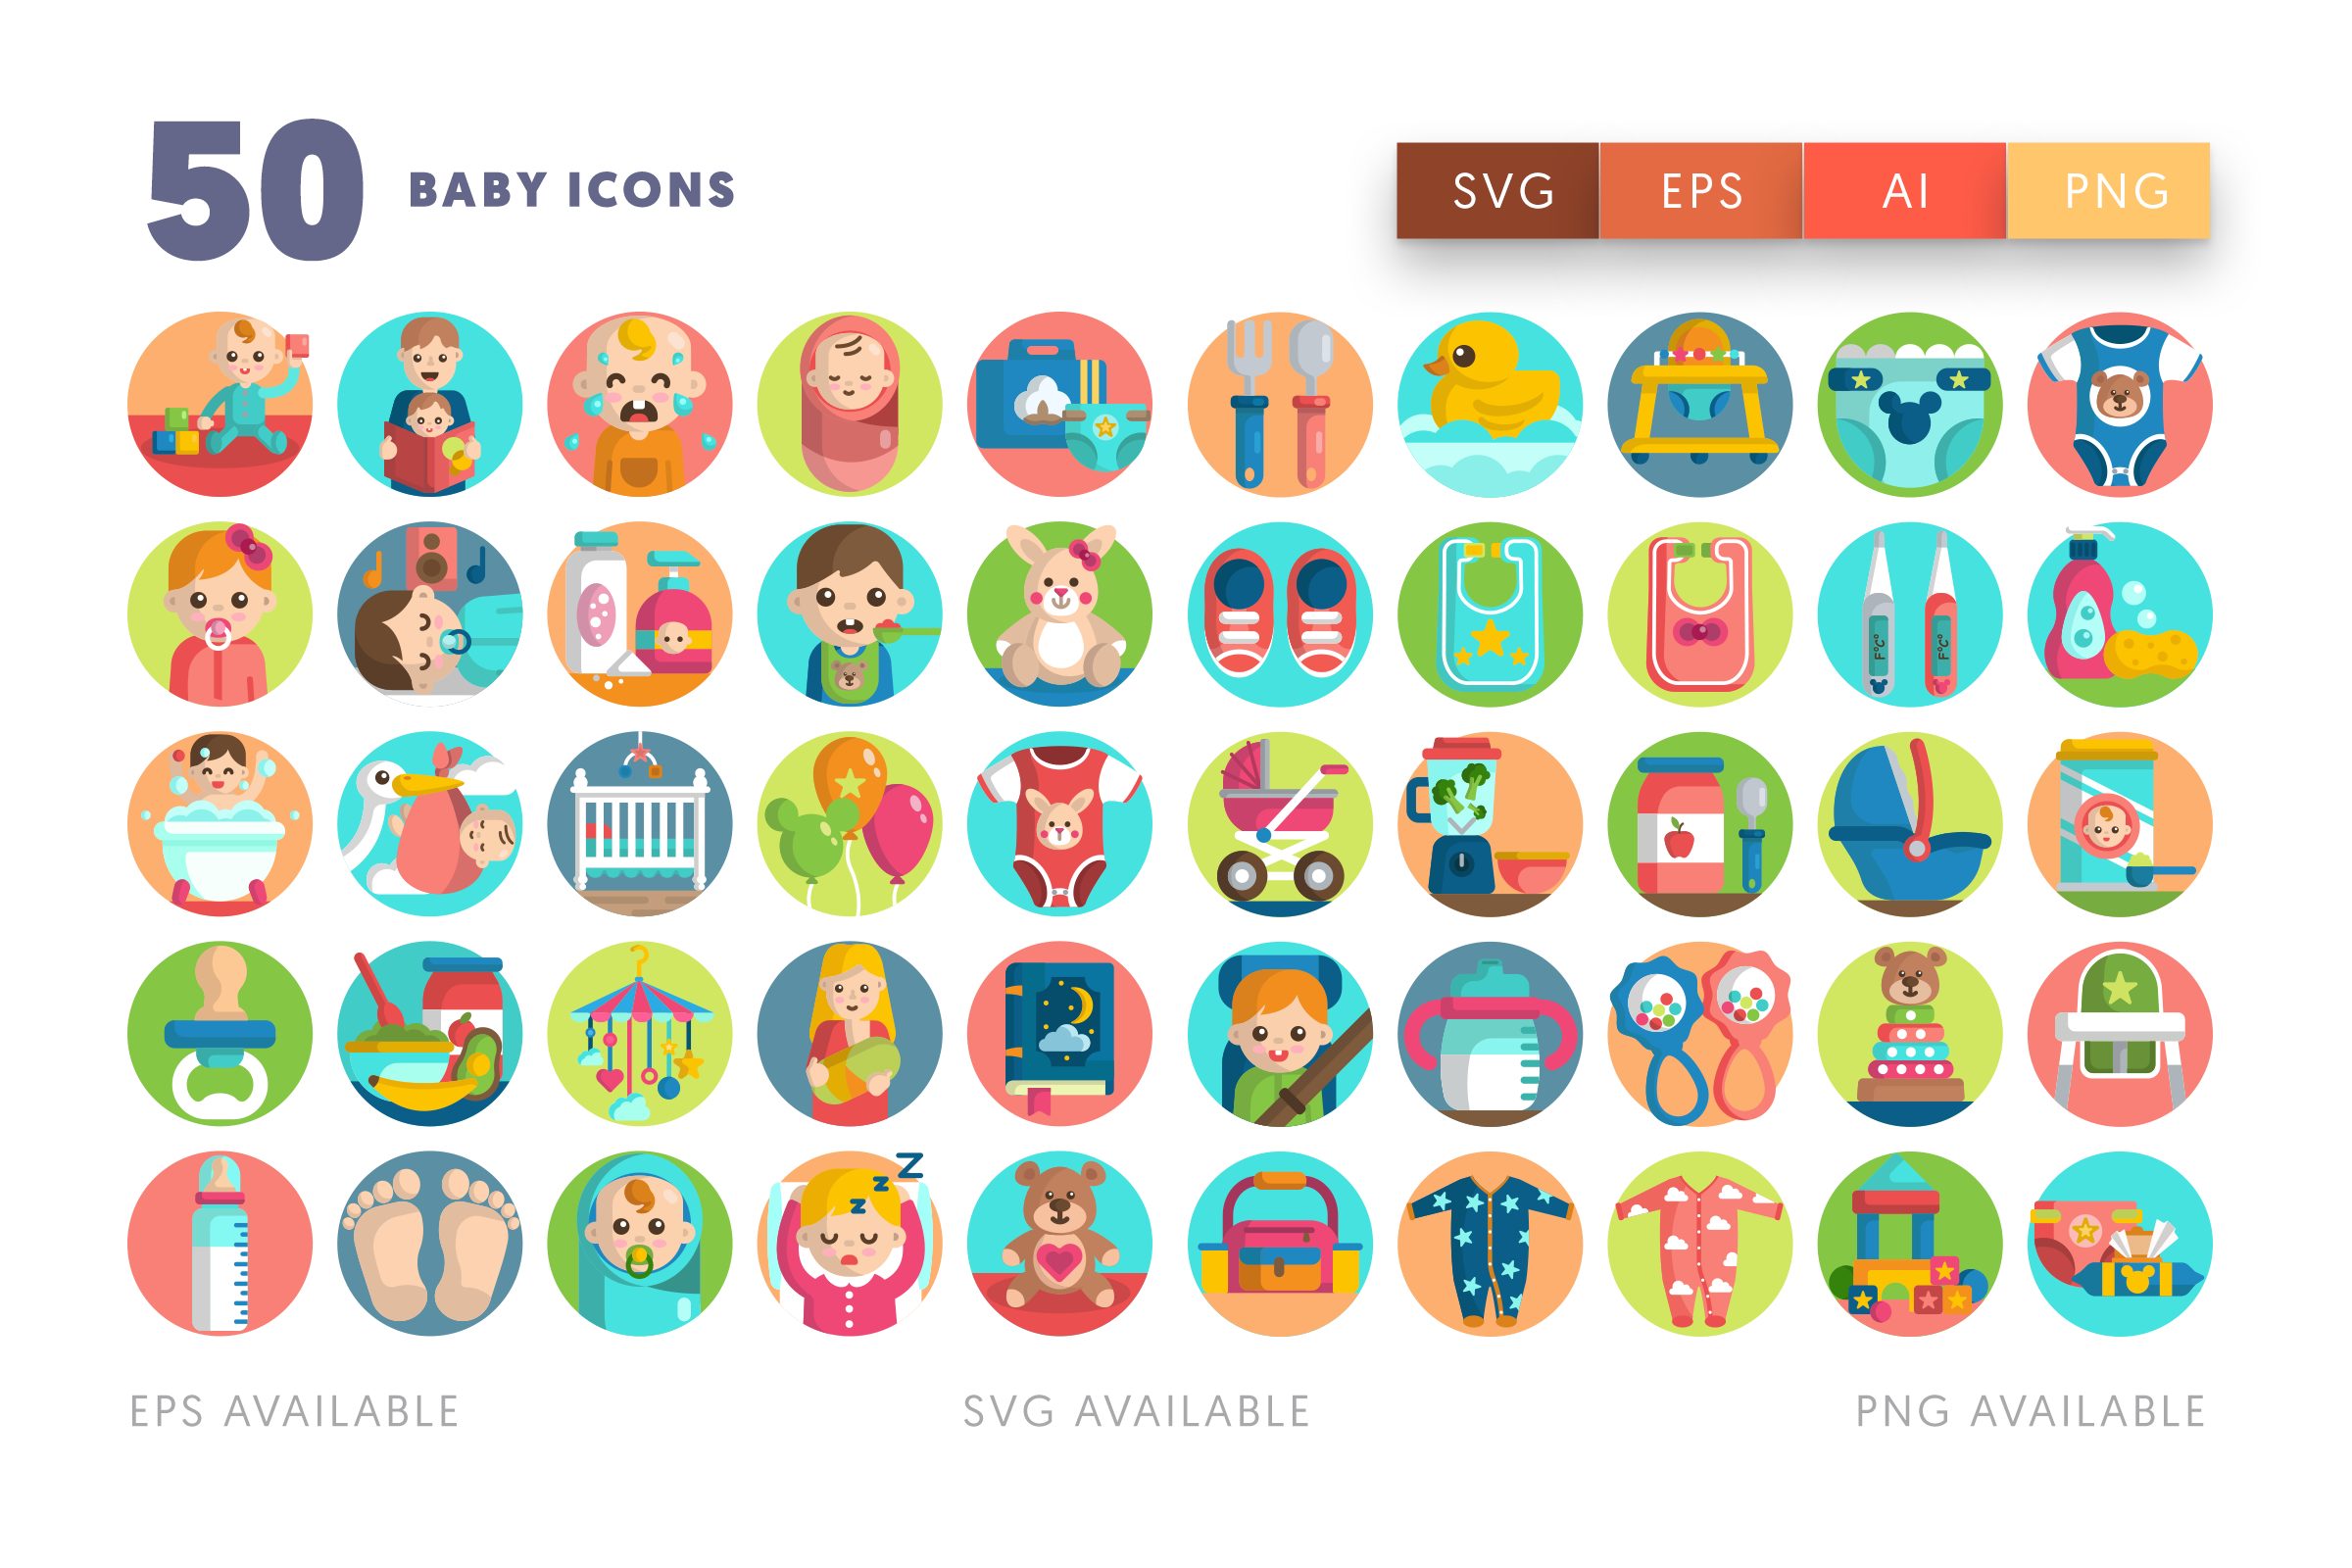 Baby icons png/svg/eps